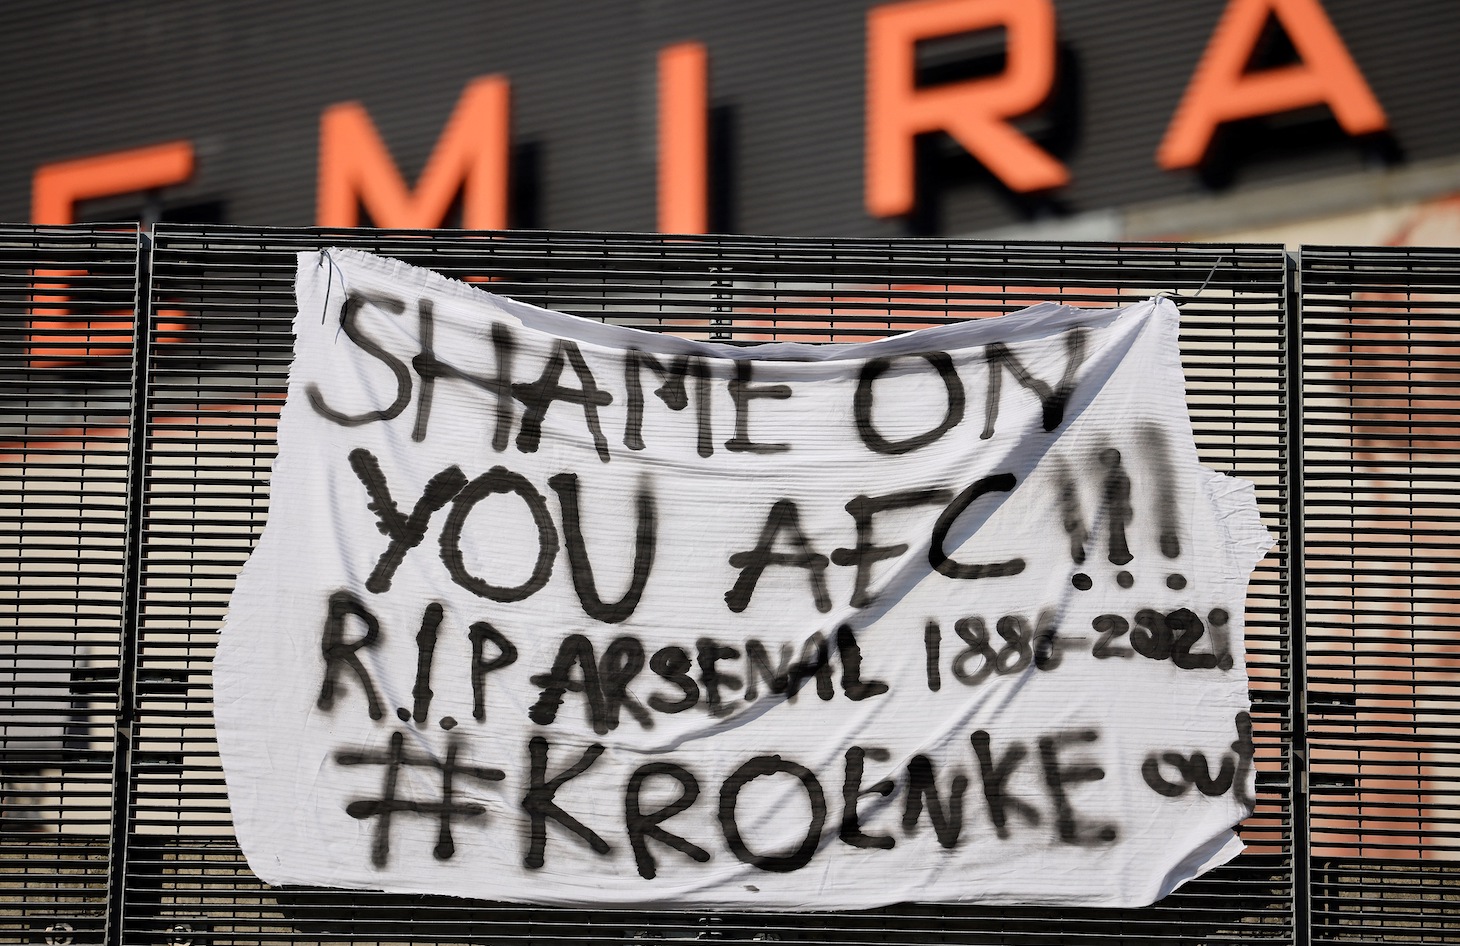 An anti-European Super League banner is pictured outside the Emirates Stadium, home of English Premier League football club Arsenal, in north London on April 19, 2021. - Twelve of Europe's biggest clubs on Monday said they planned to launch a breakaway Super League, despite the threat of an international ban for them and their players. "AC Milan, Arsenal, Atletico Madrid, Chelsea, Barcelona, Inter Milan, Juventus, Liverpool, Manchester City, Manchester United, Real Madrid and Tottenham Hotspur have all joined as founding clubs," said a statement by the group. (Photo by Tolga Akmen / AFP) (Photo by TOLGA AKMEN/AFP via Getty Images)